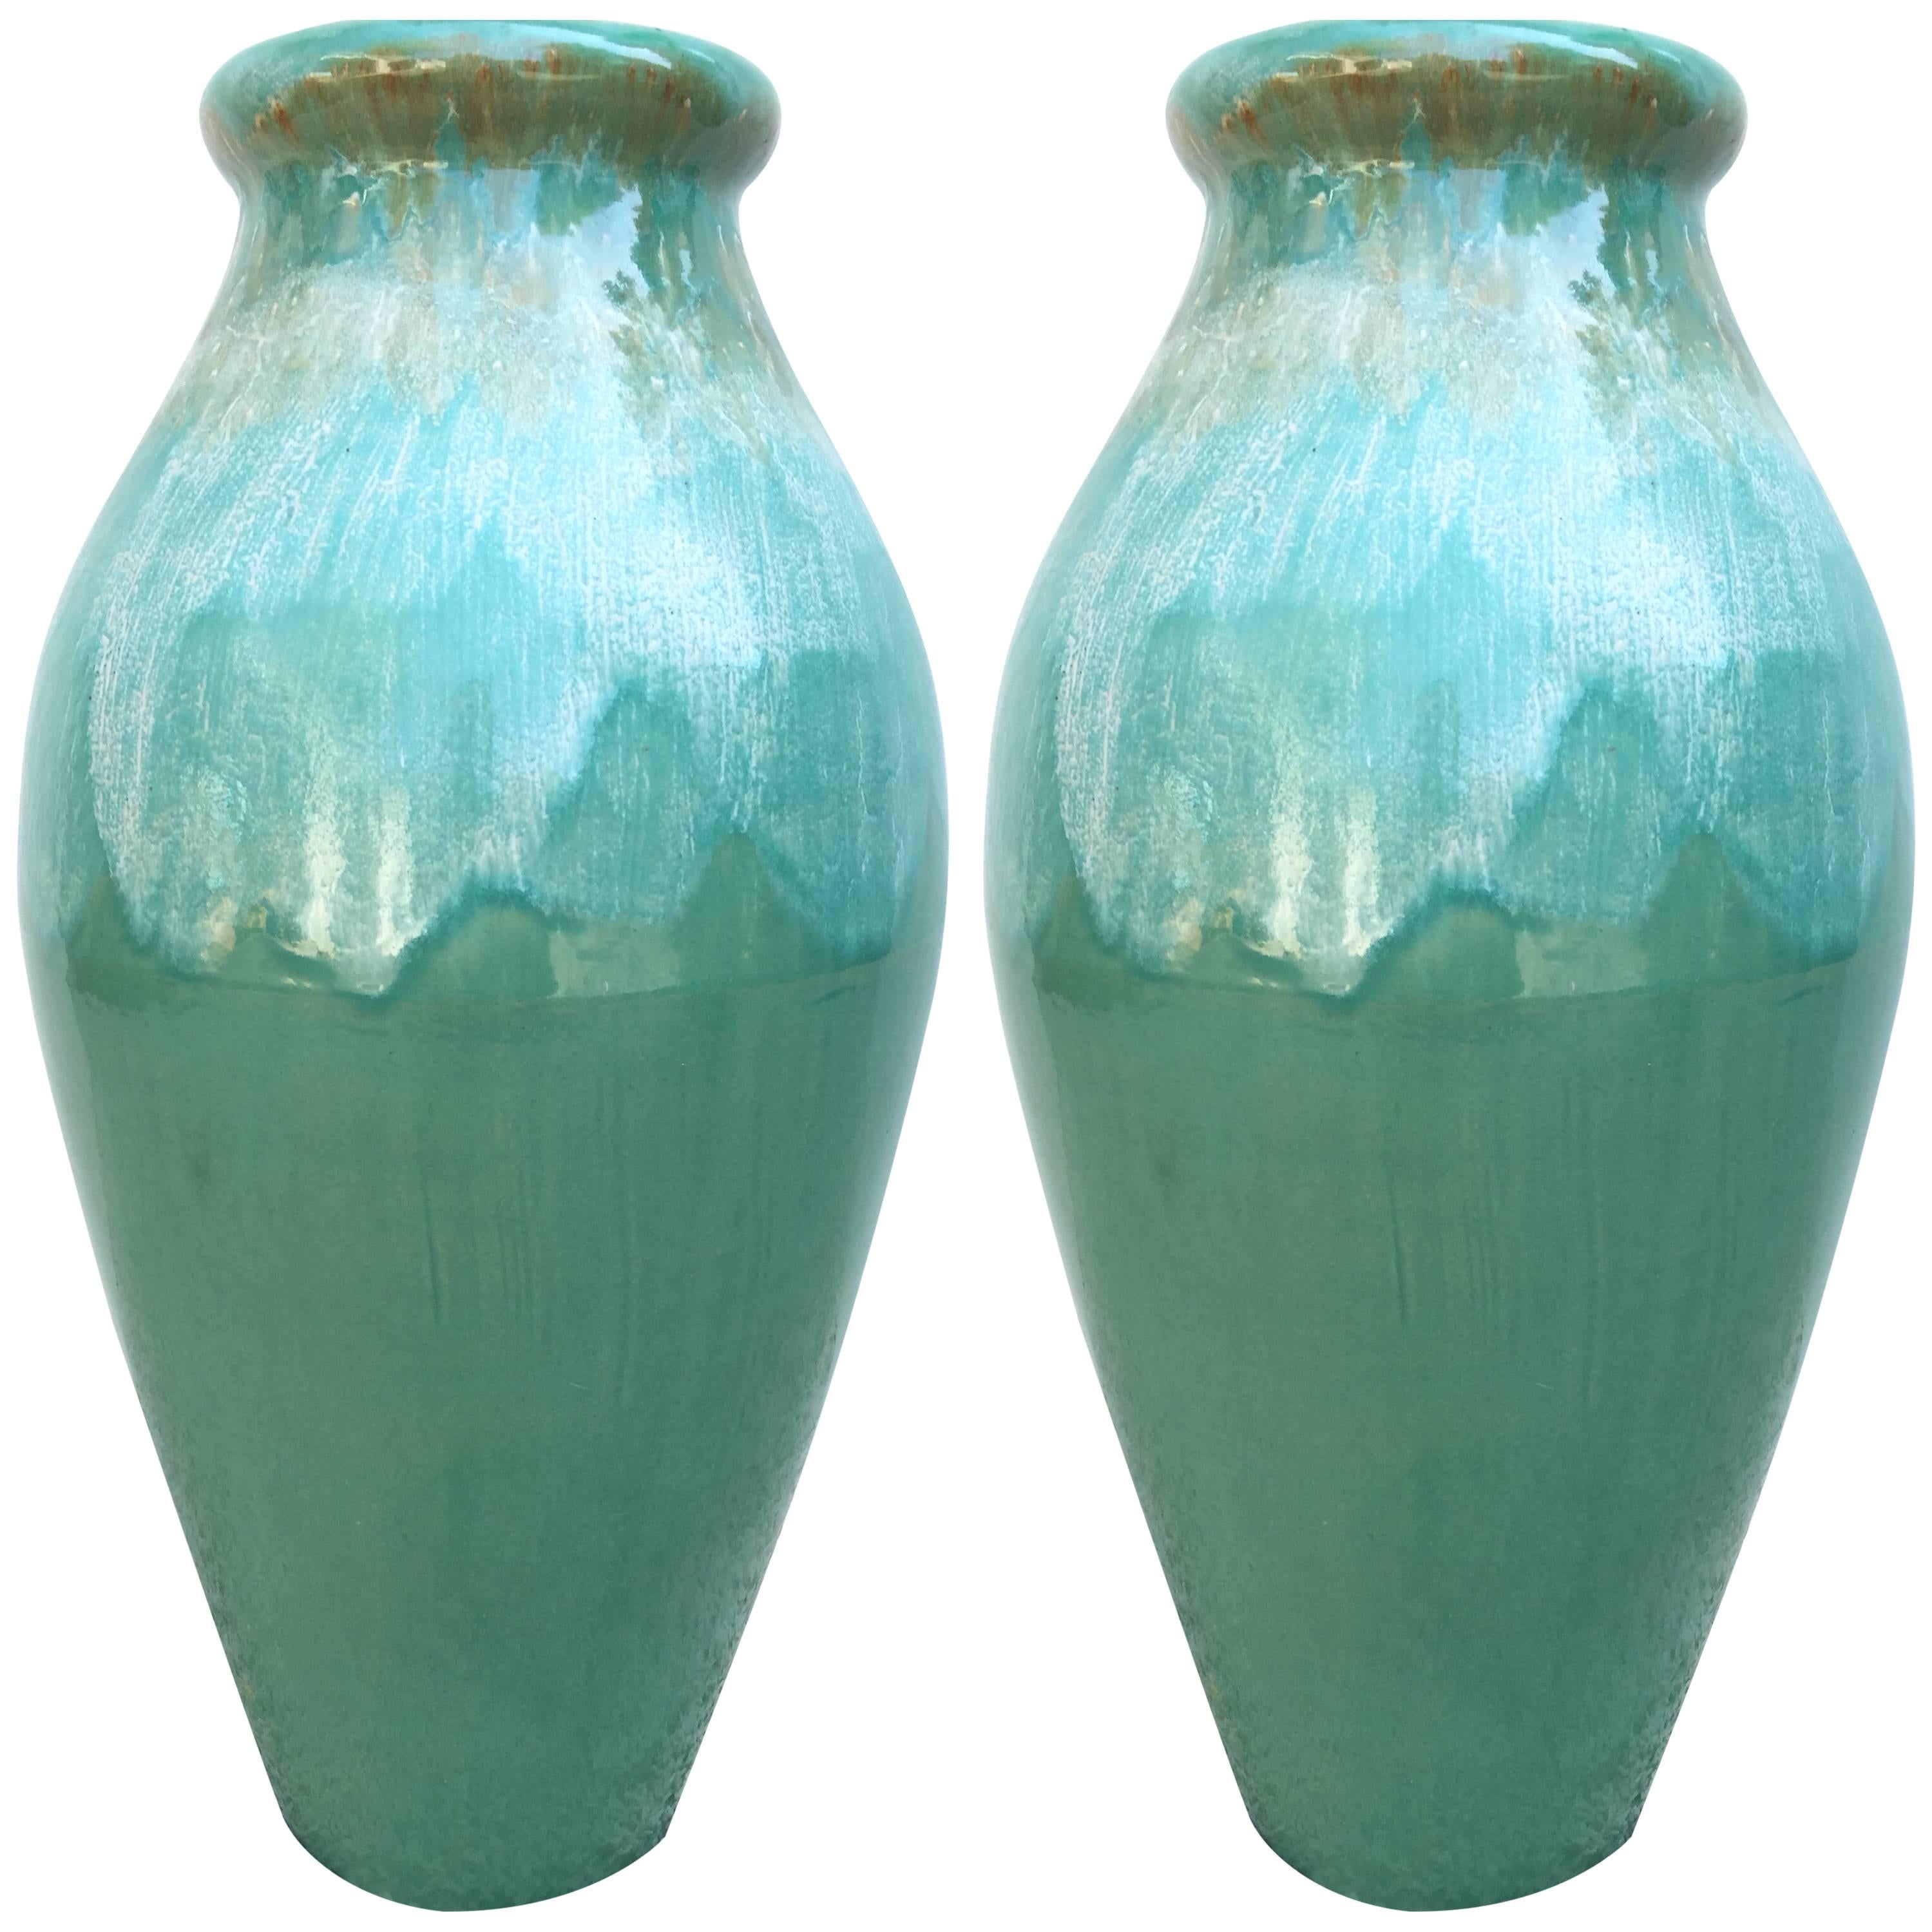 What type of pottery is Roseville?